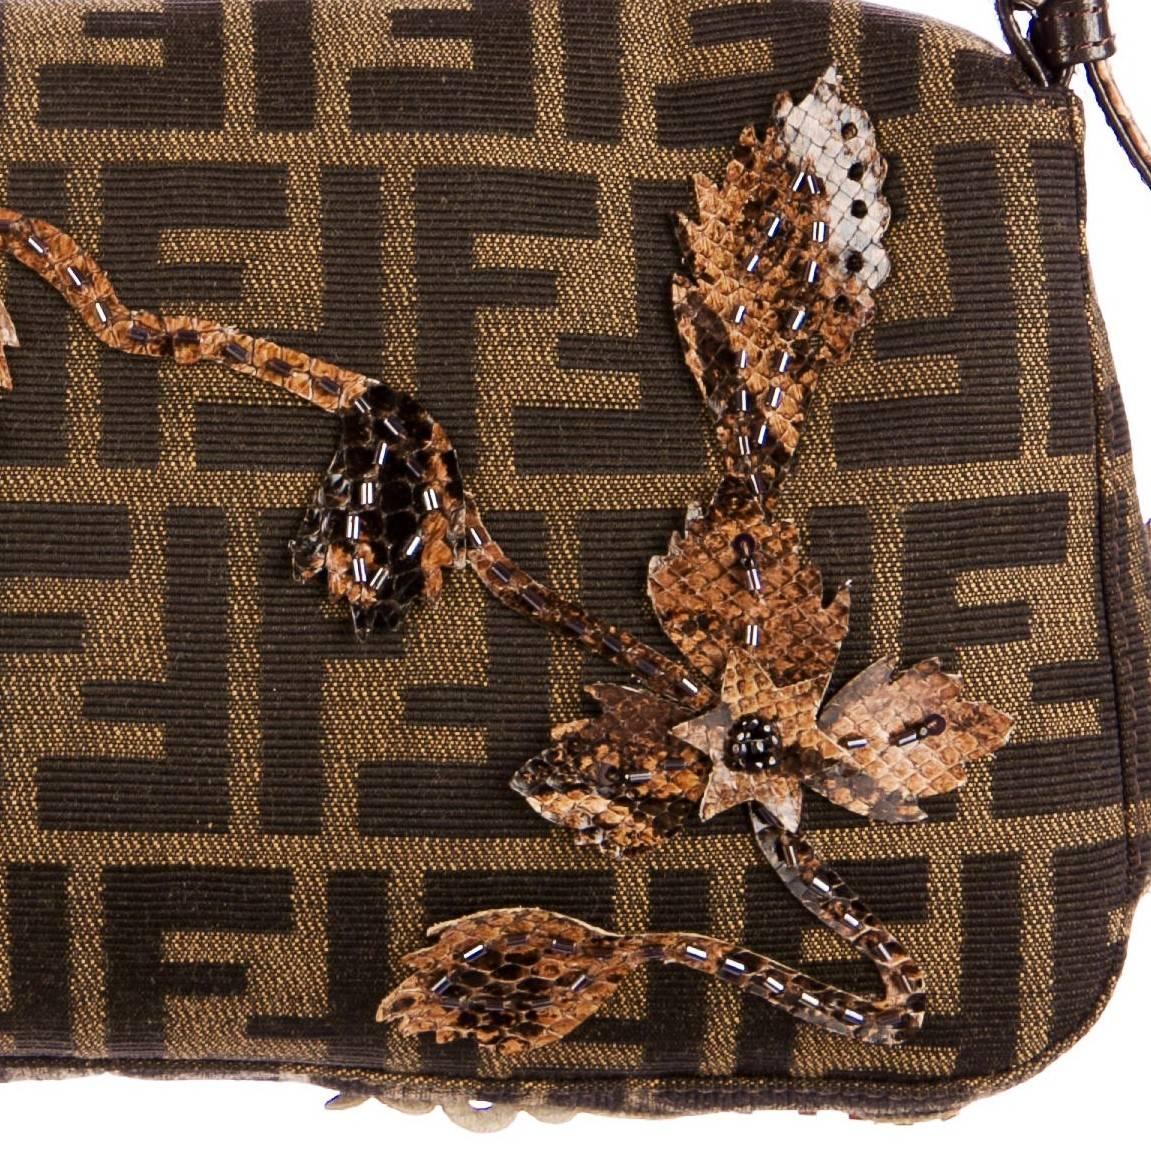 New Fendi Zucca Python Baguette Bag Featured in the 15th Anniversary Book 6